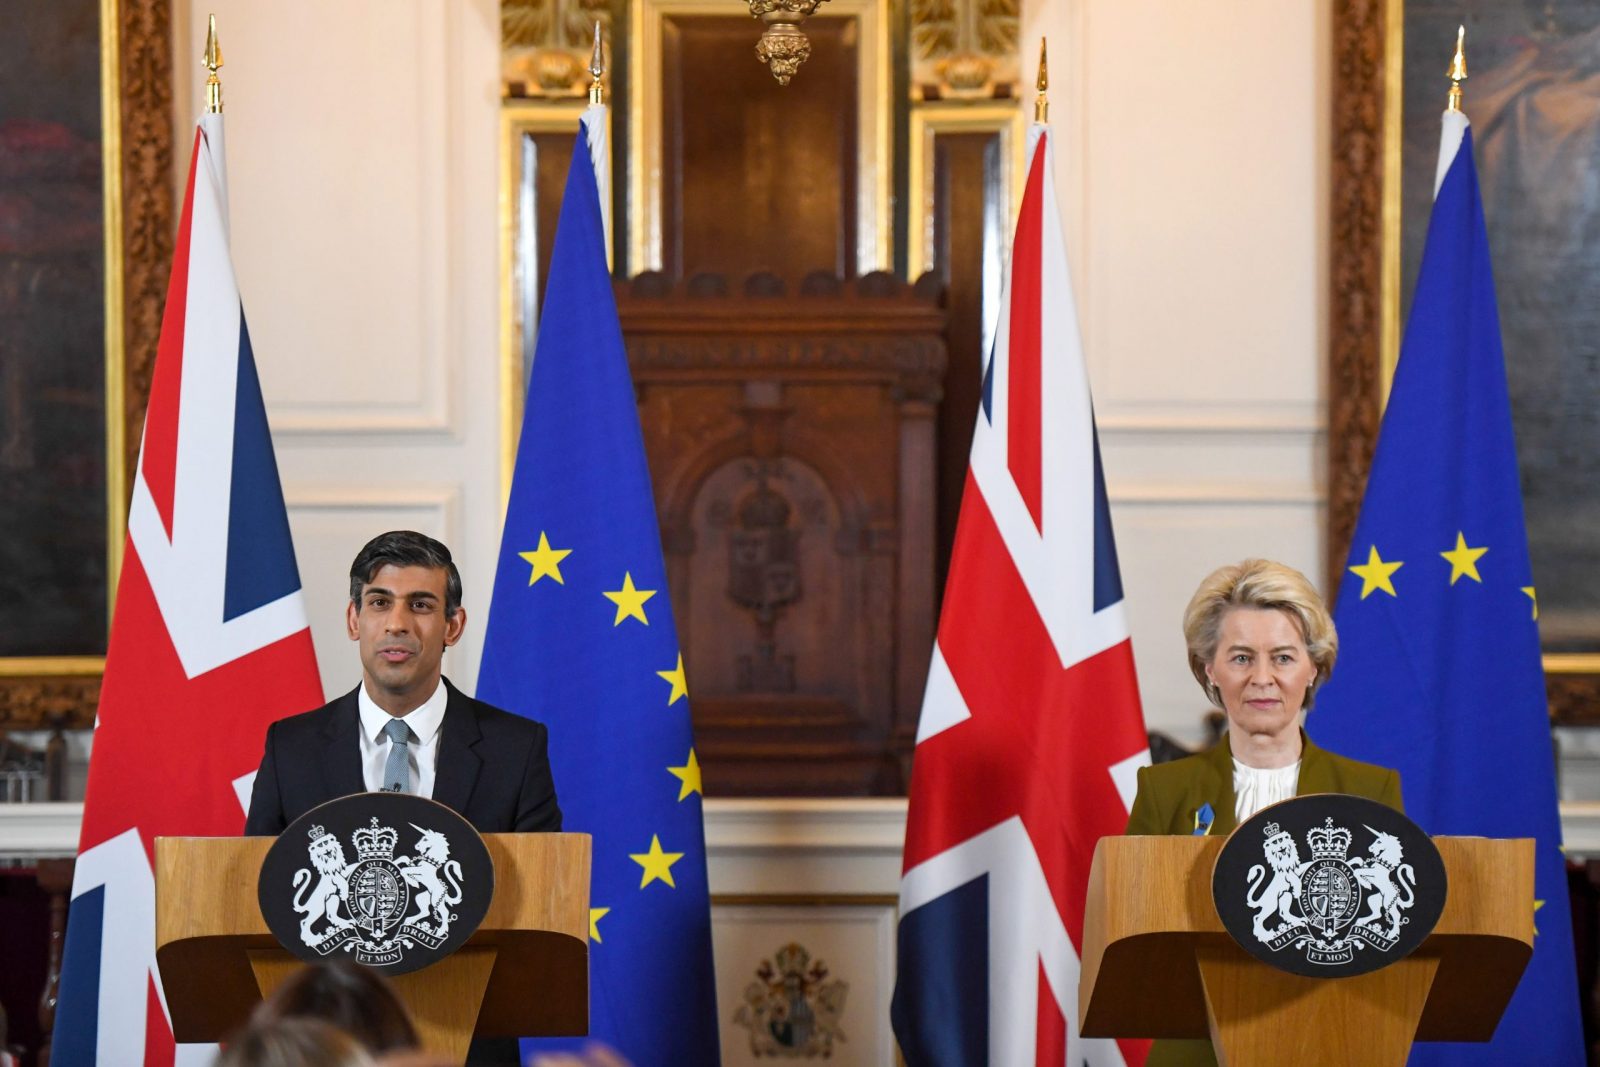 epa10494021 Britain's Prime Minister Rishi Sunak (L) and European Commission President Ursula von der Leyen (R) attend a joint news conference on a post-Brexit deal in Windsor, Britain, 27 February 2023. The UK and European Union reached a deal on Northern Ireland's trading arrangements, ending more than a year of often acrimonious wrangling over the post-Brexit settlement for the region, people familiar with the matter said.  EPA/CHRIS J. RATCLIFFE / POOL